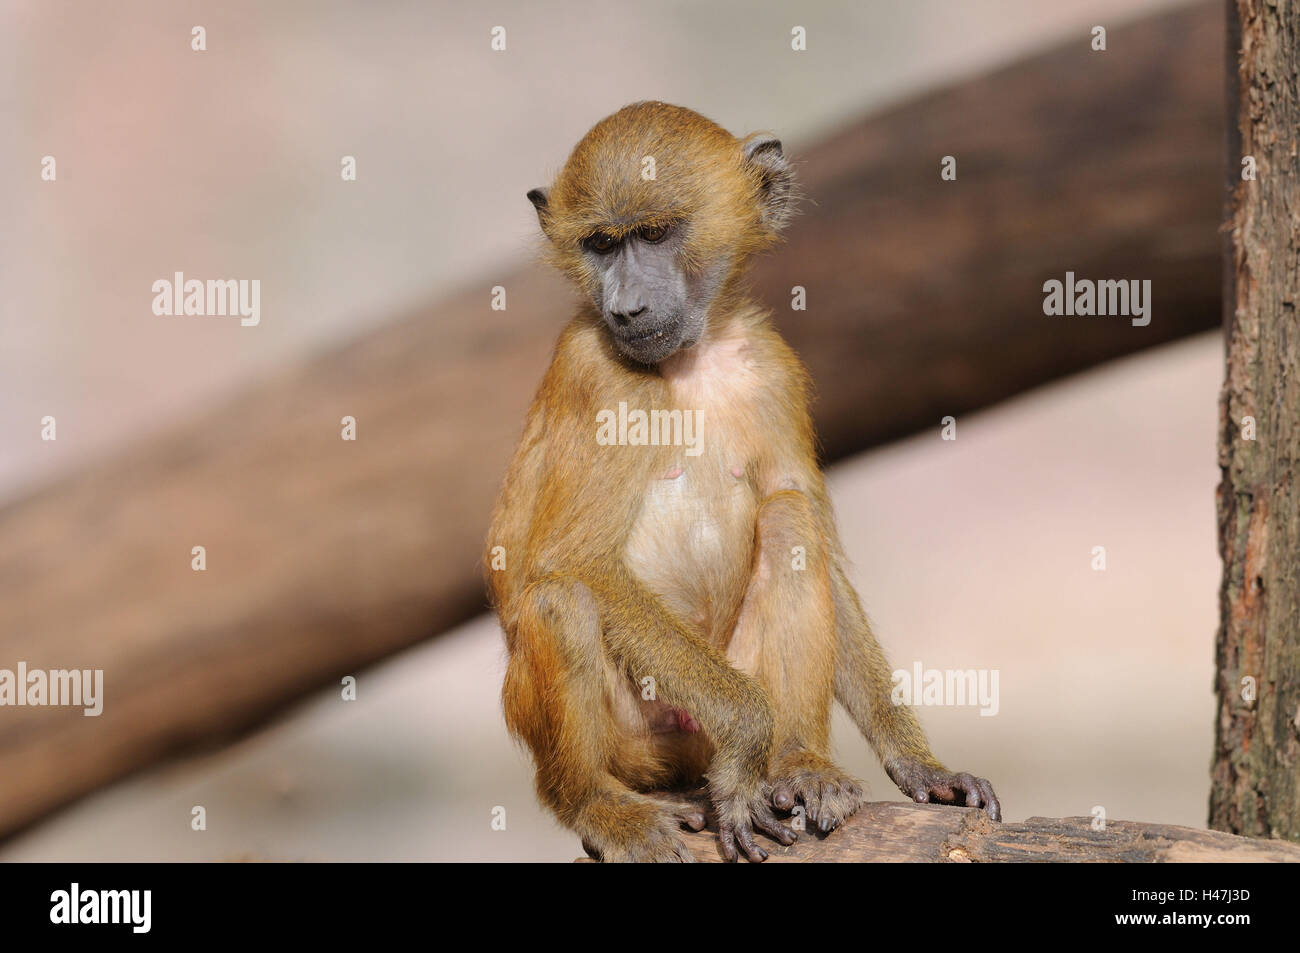 Guinea baboon, Papio papio, young animal, trunk, head-on, sit, focus on the foreground, Stock Photo